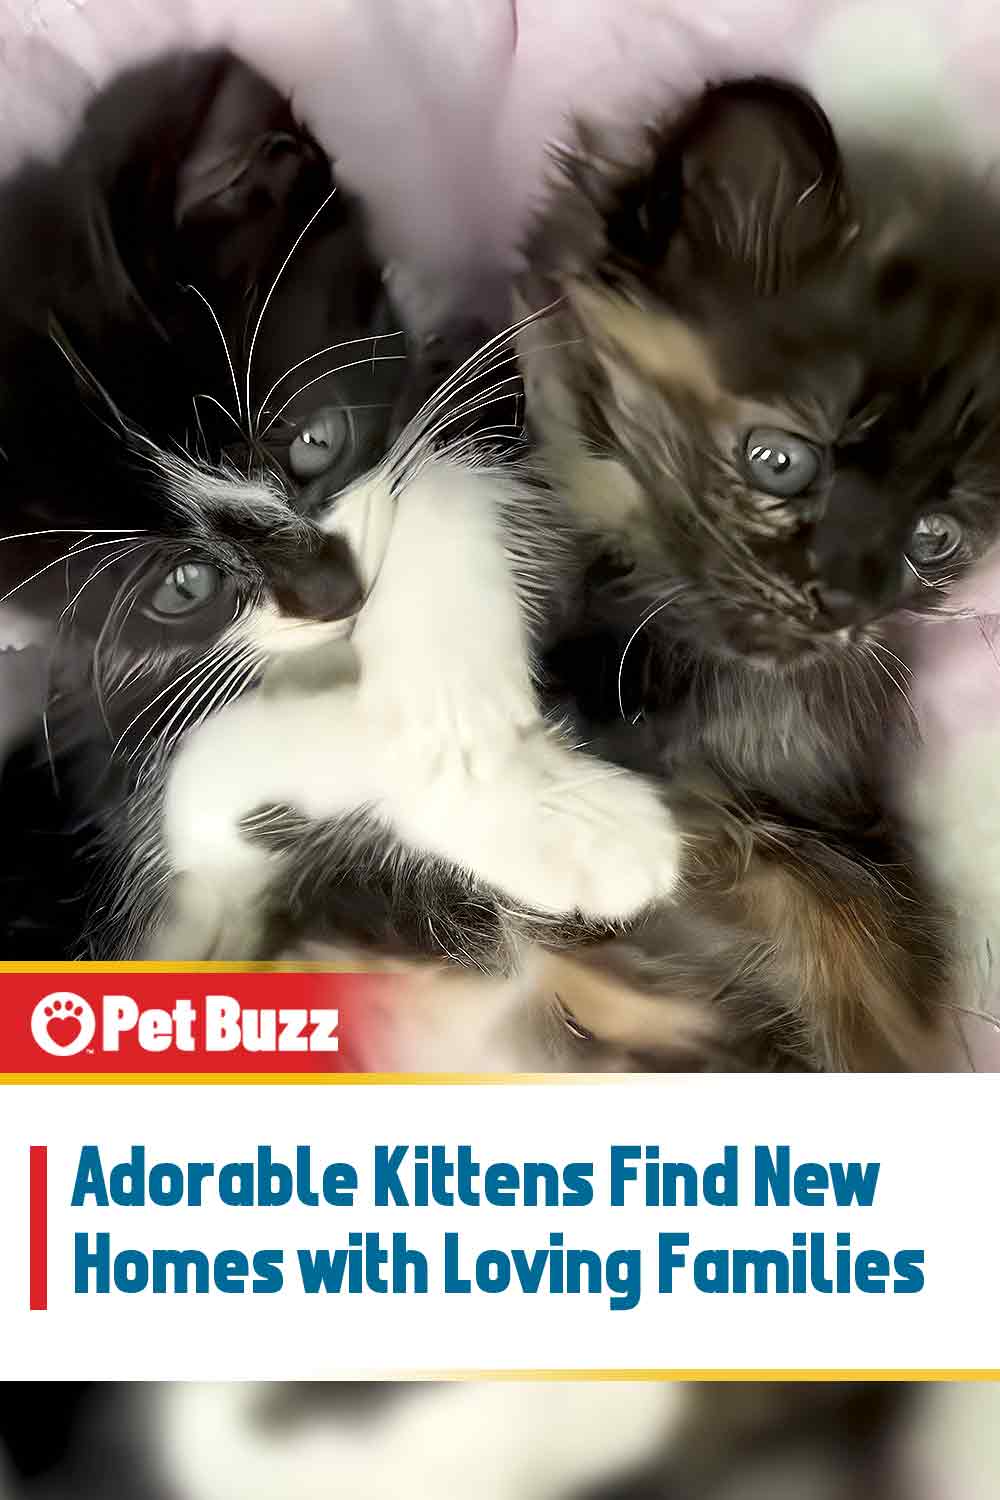 Adorable Kittens Find New Homes with Loving Families